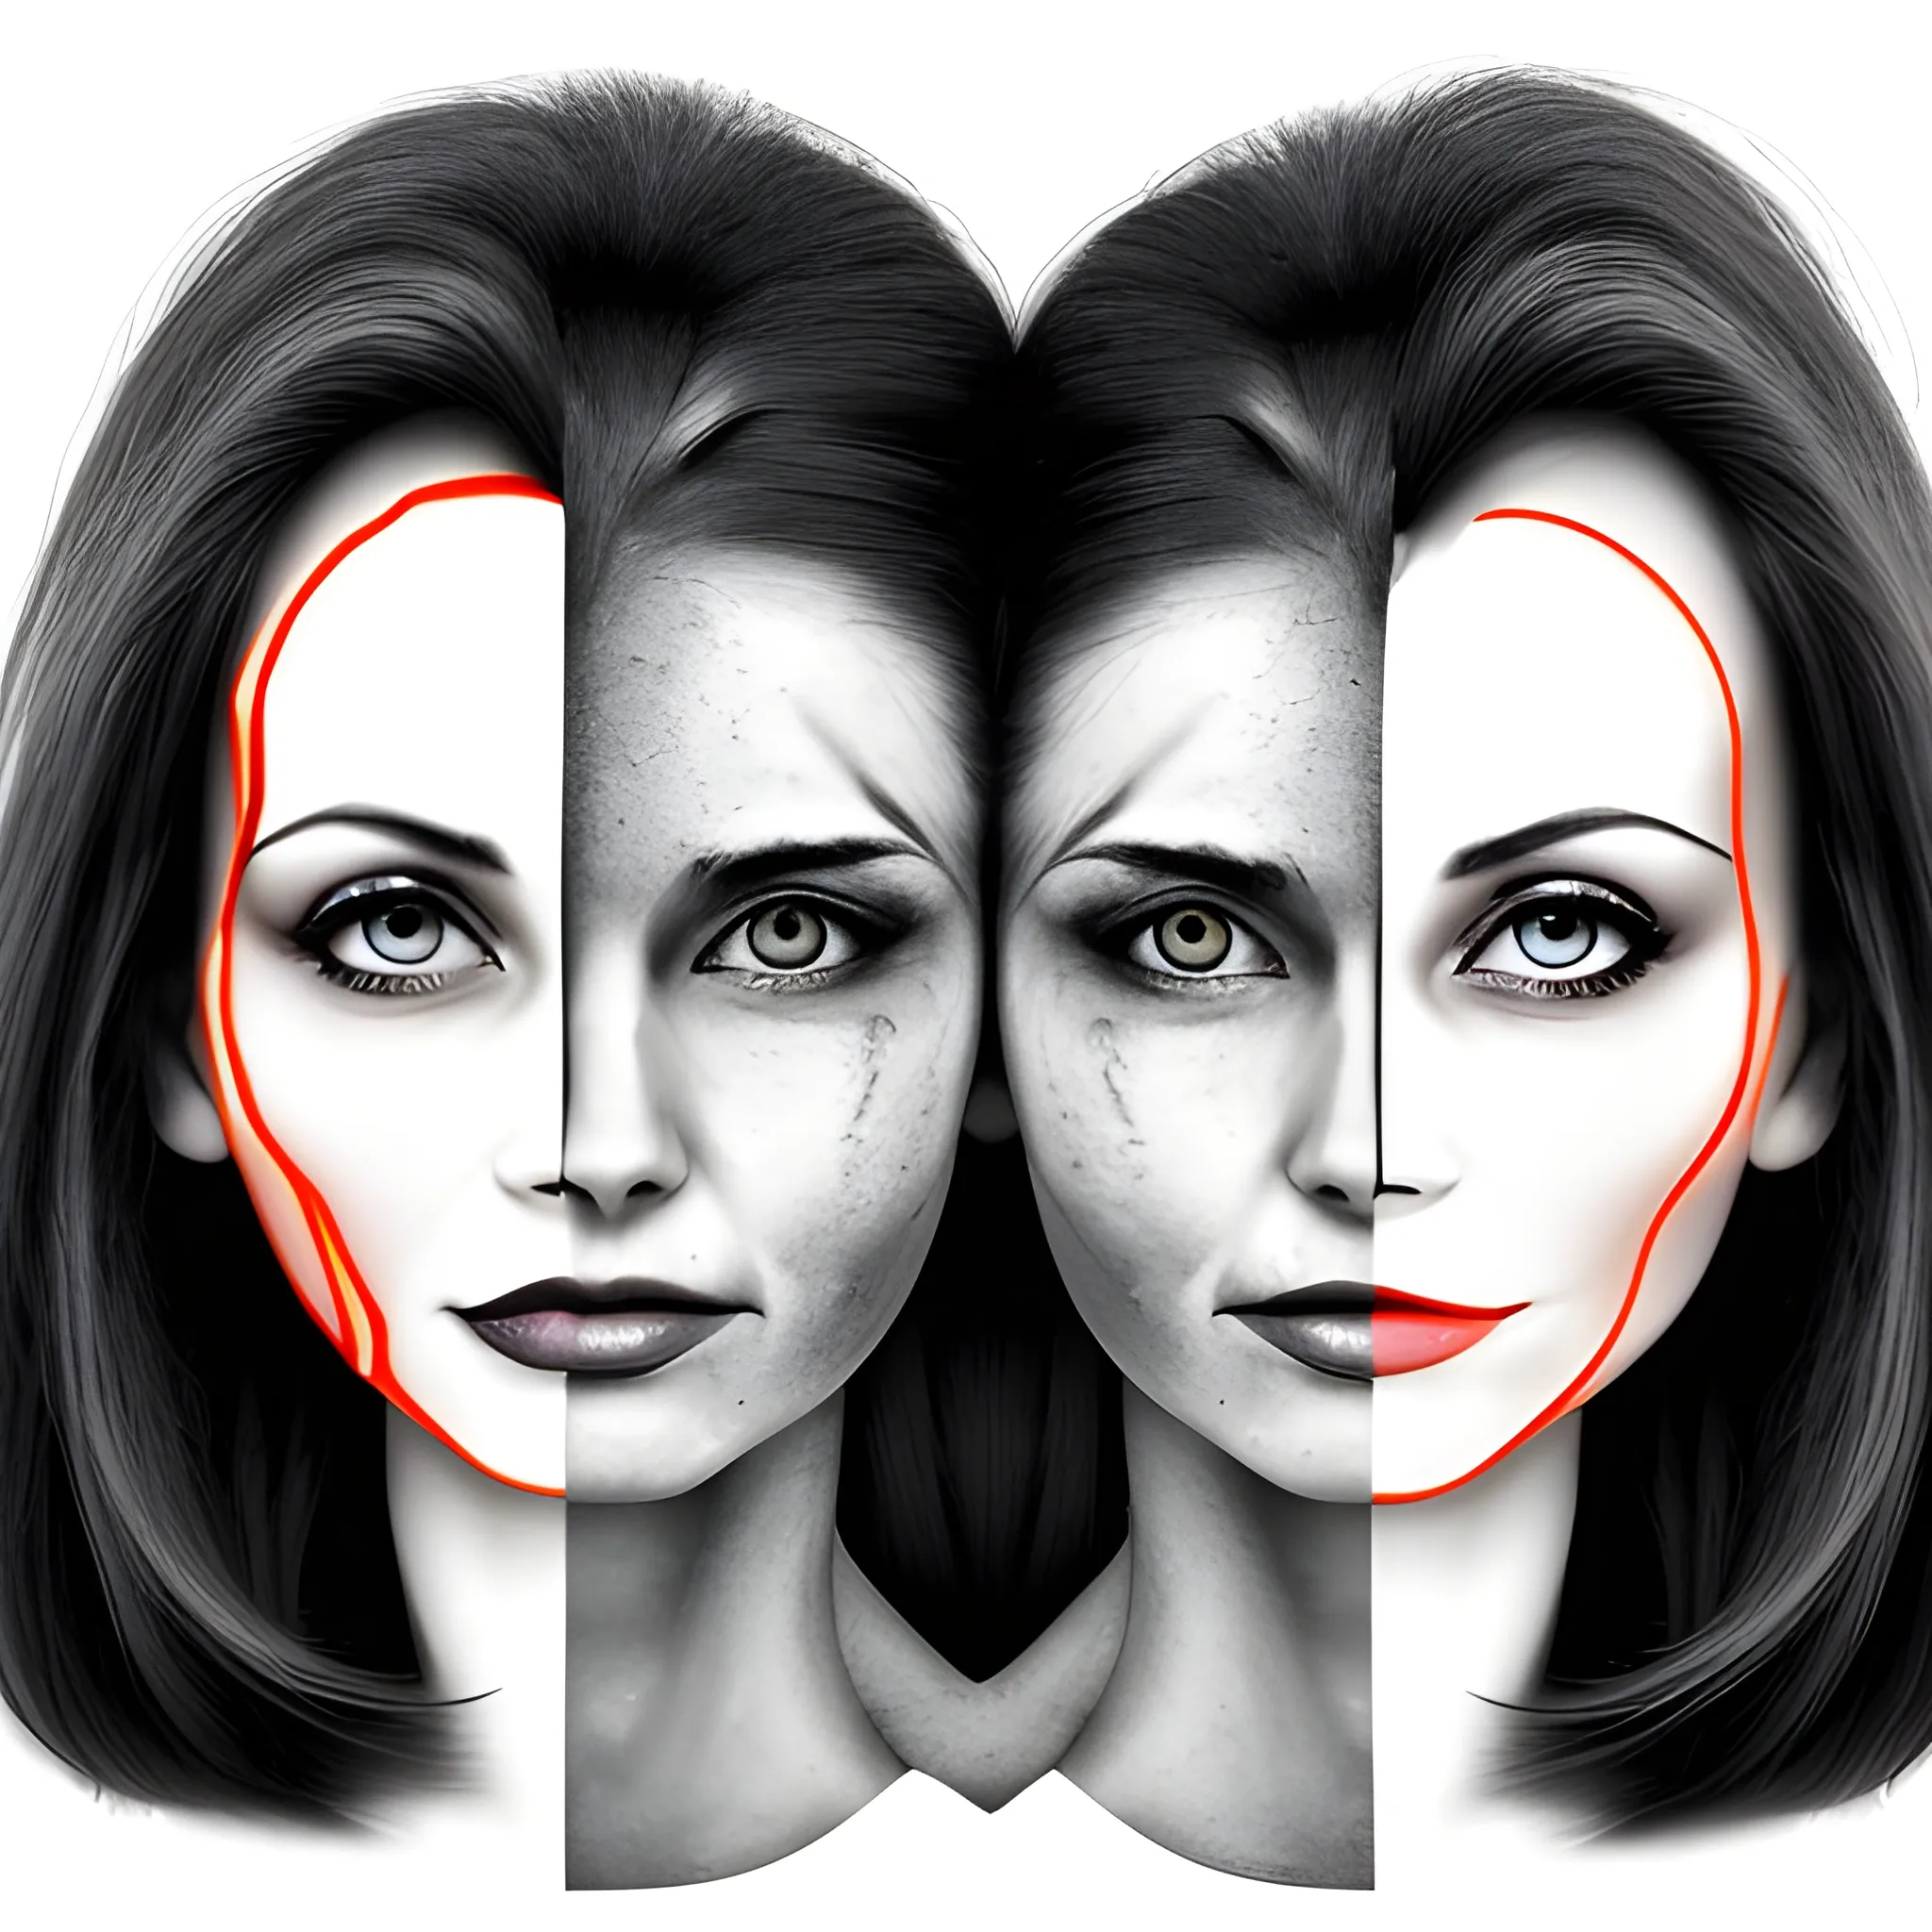 beutiflest woman with two faces and one complete body